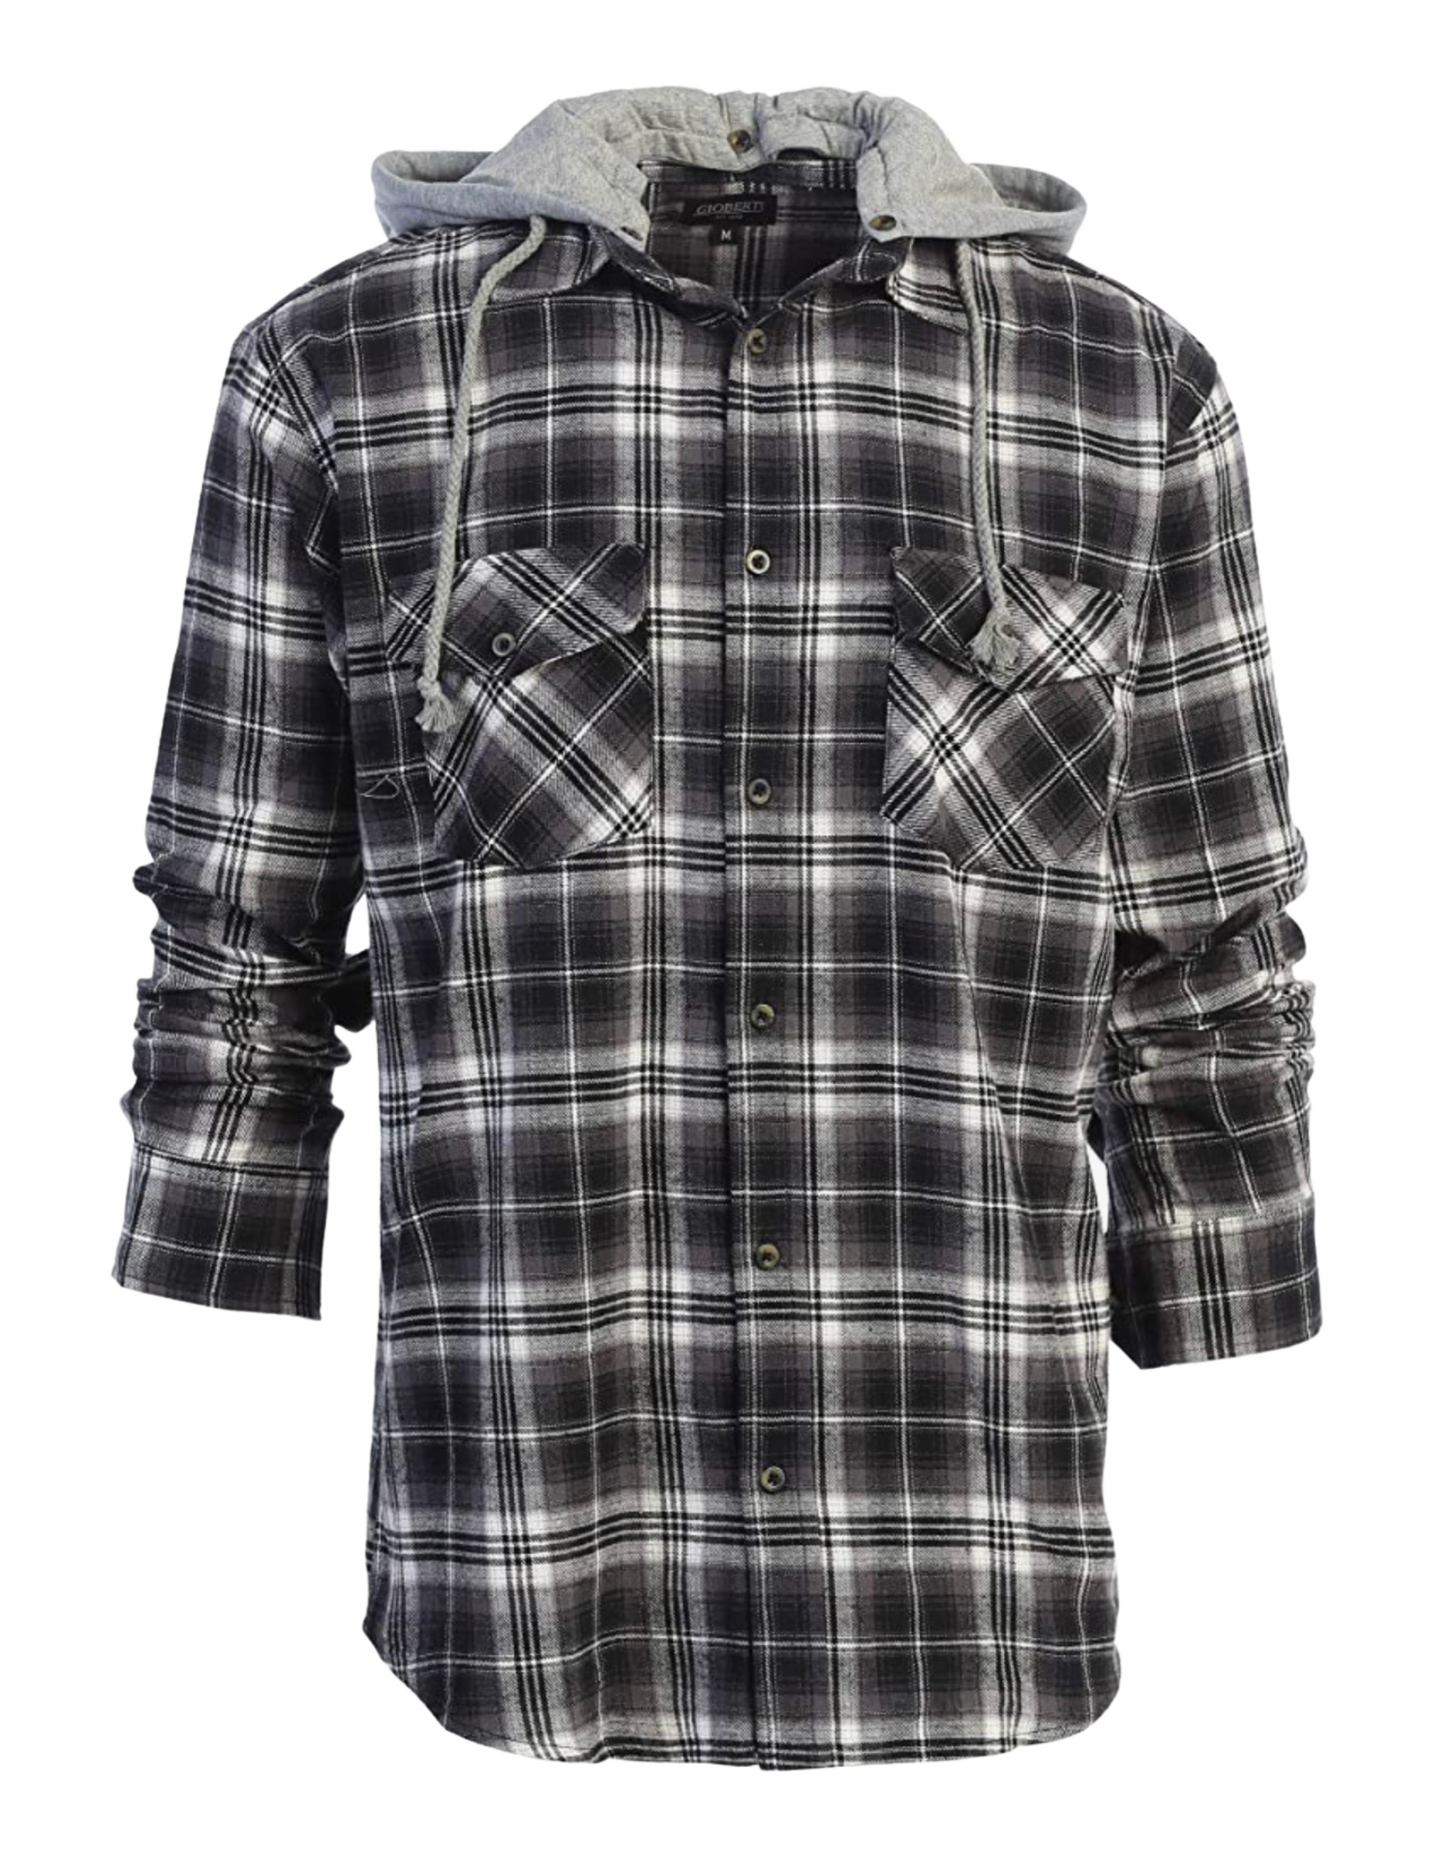 Men's Flannel Shirt Gray & Black Checkered Light Weight with Removable Hoodie.